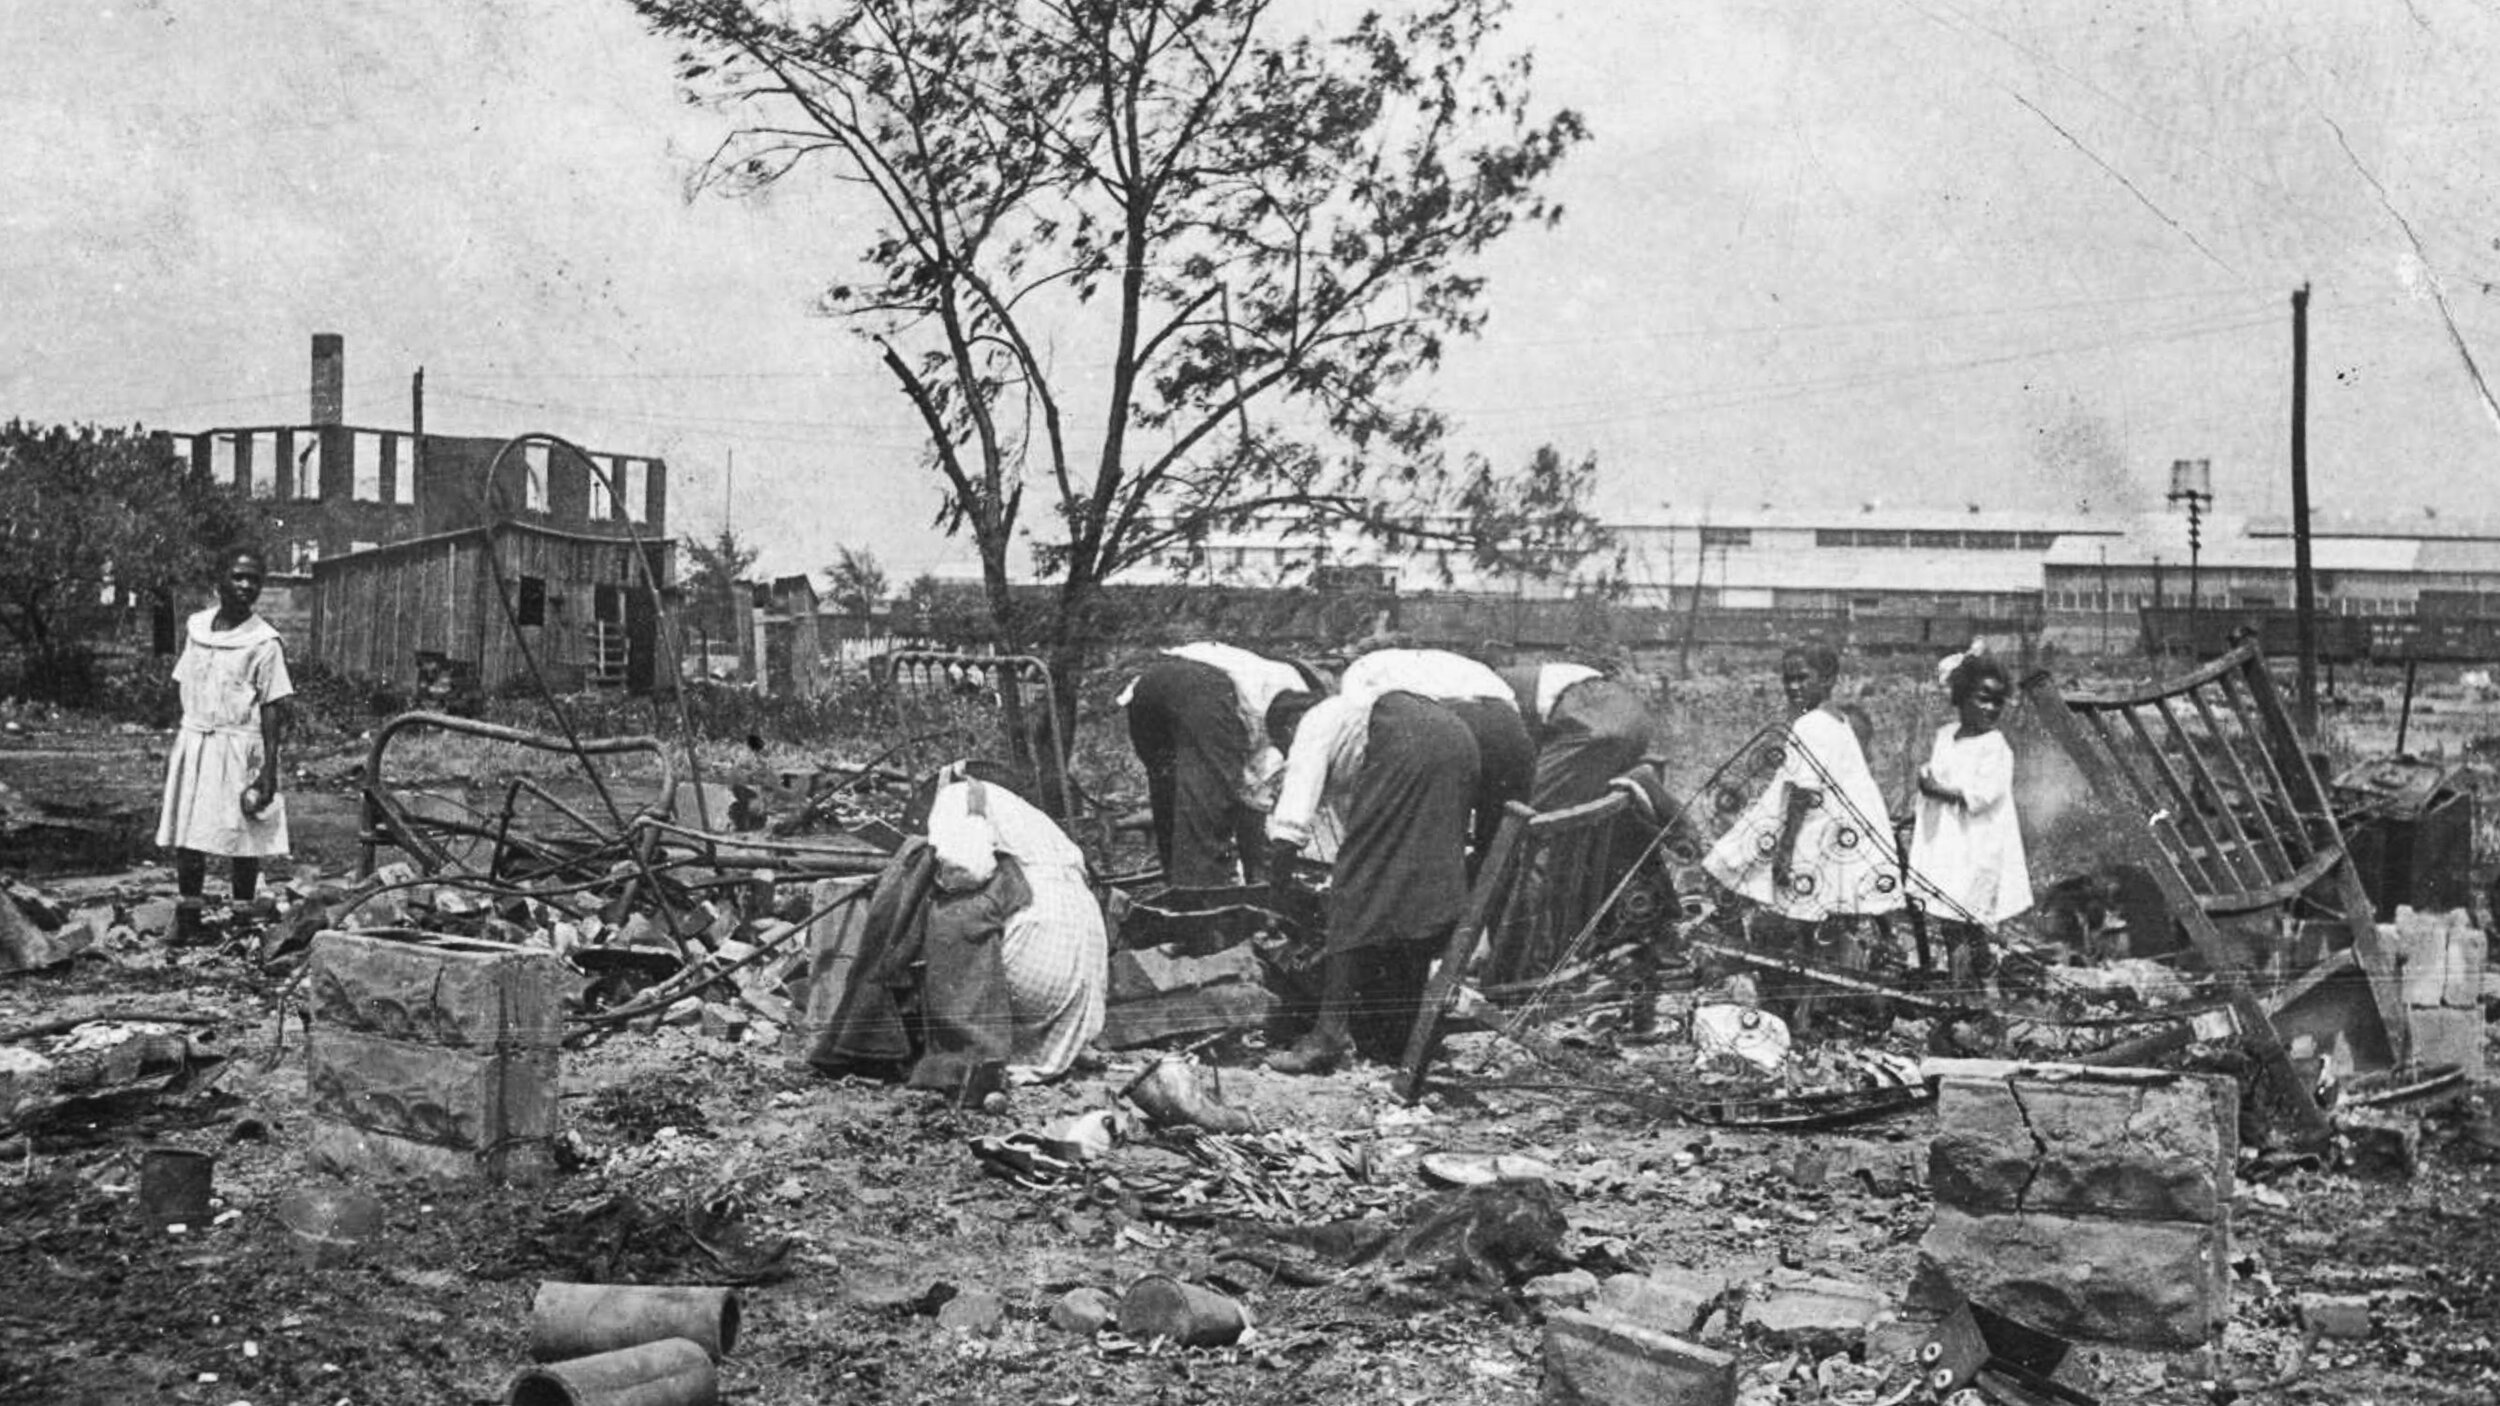   People searching through rubble after the Tulsa Race Riot . Used with permission from the  Oklahoma Historical Society  